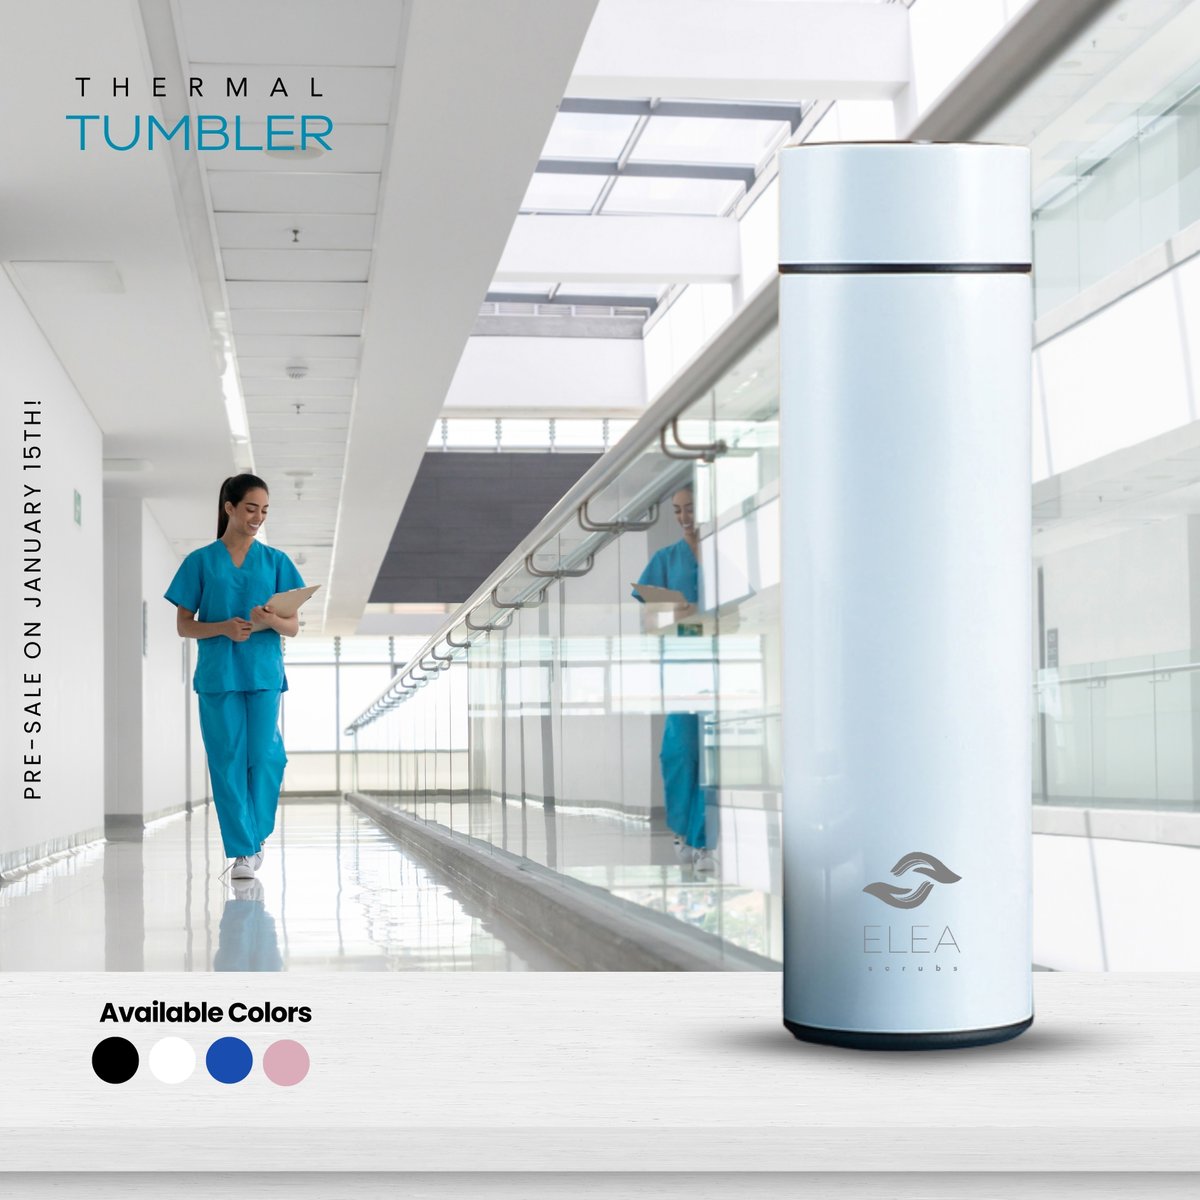 Pre-sale begins on January 15th! ✨

#thermaltumbler #onthegoessentials #tumbleradventures #stylishsips #tumblerupgrade #medical #beverage #coffee #tumblerlife #thermal #tumbler #tumblers #stayhydrated #sipresponsibly #hotorcoldcompanion #thermaltech